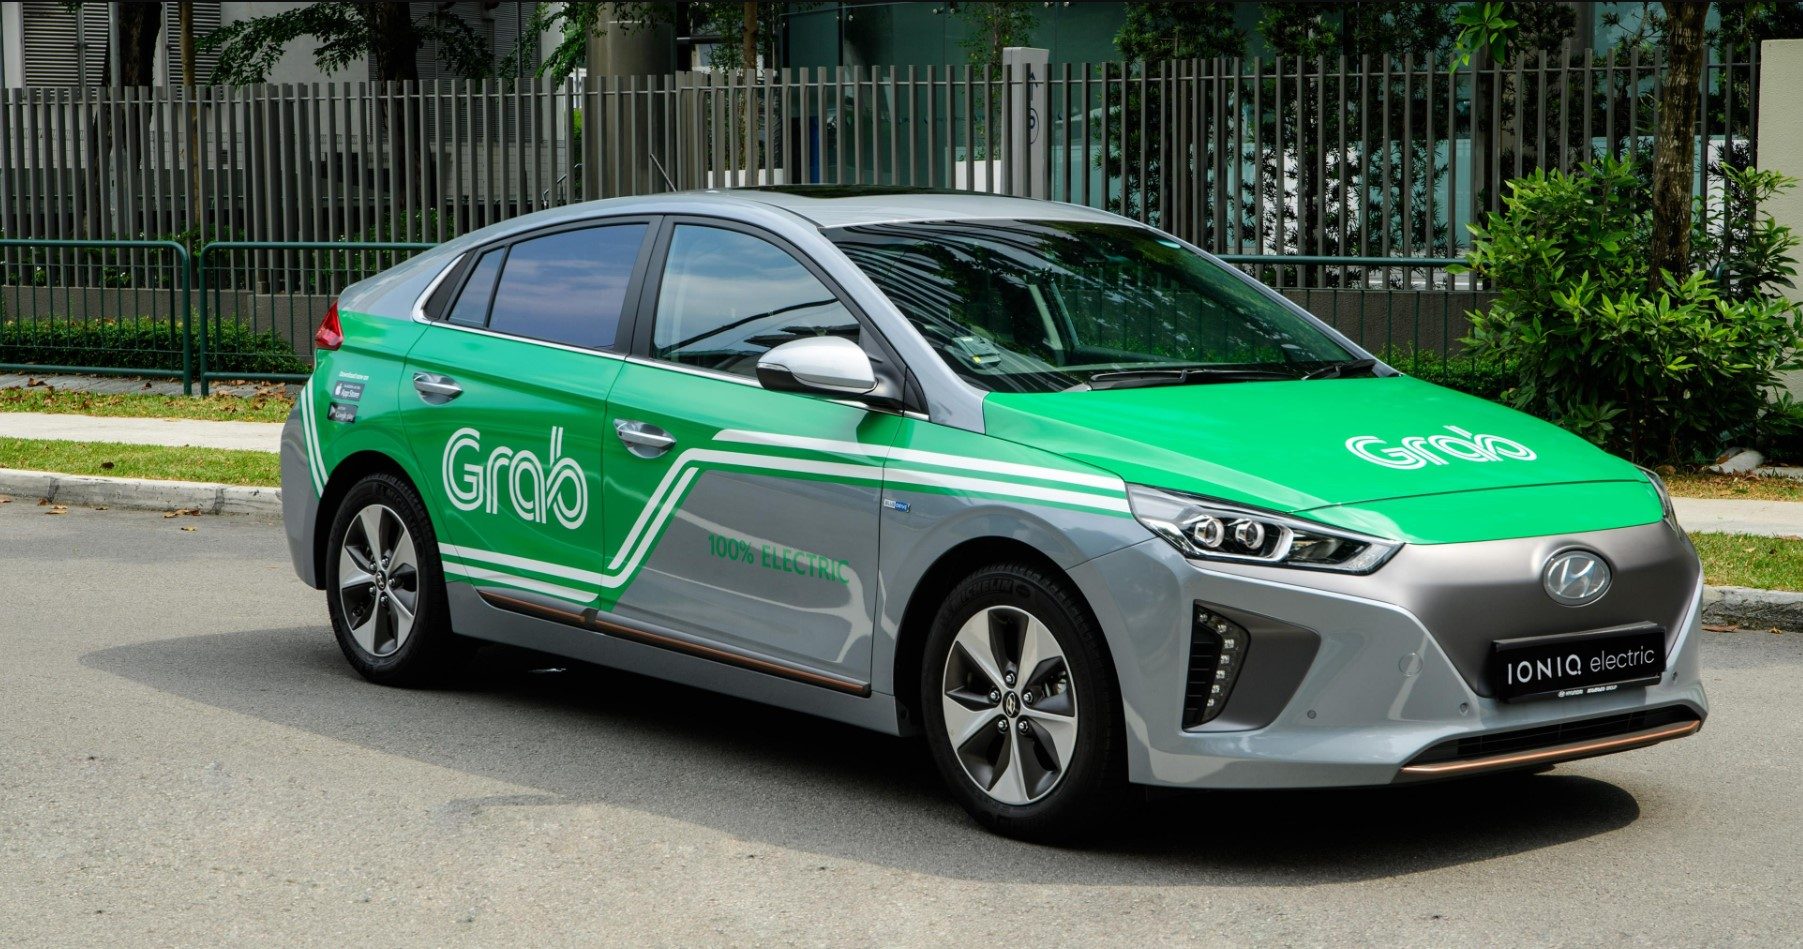 SG Digest: Grab, Trans-cab merger faces public test; Payoneer bags MPI licence